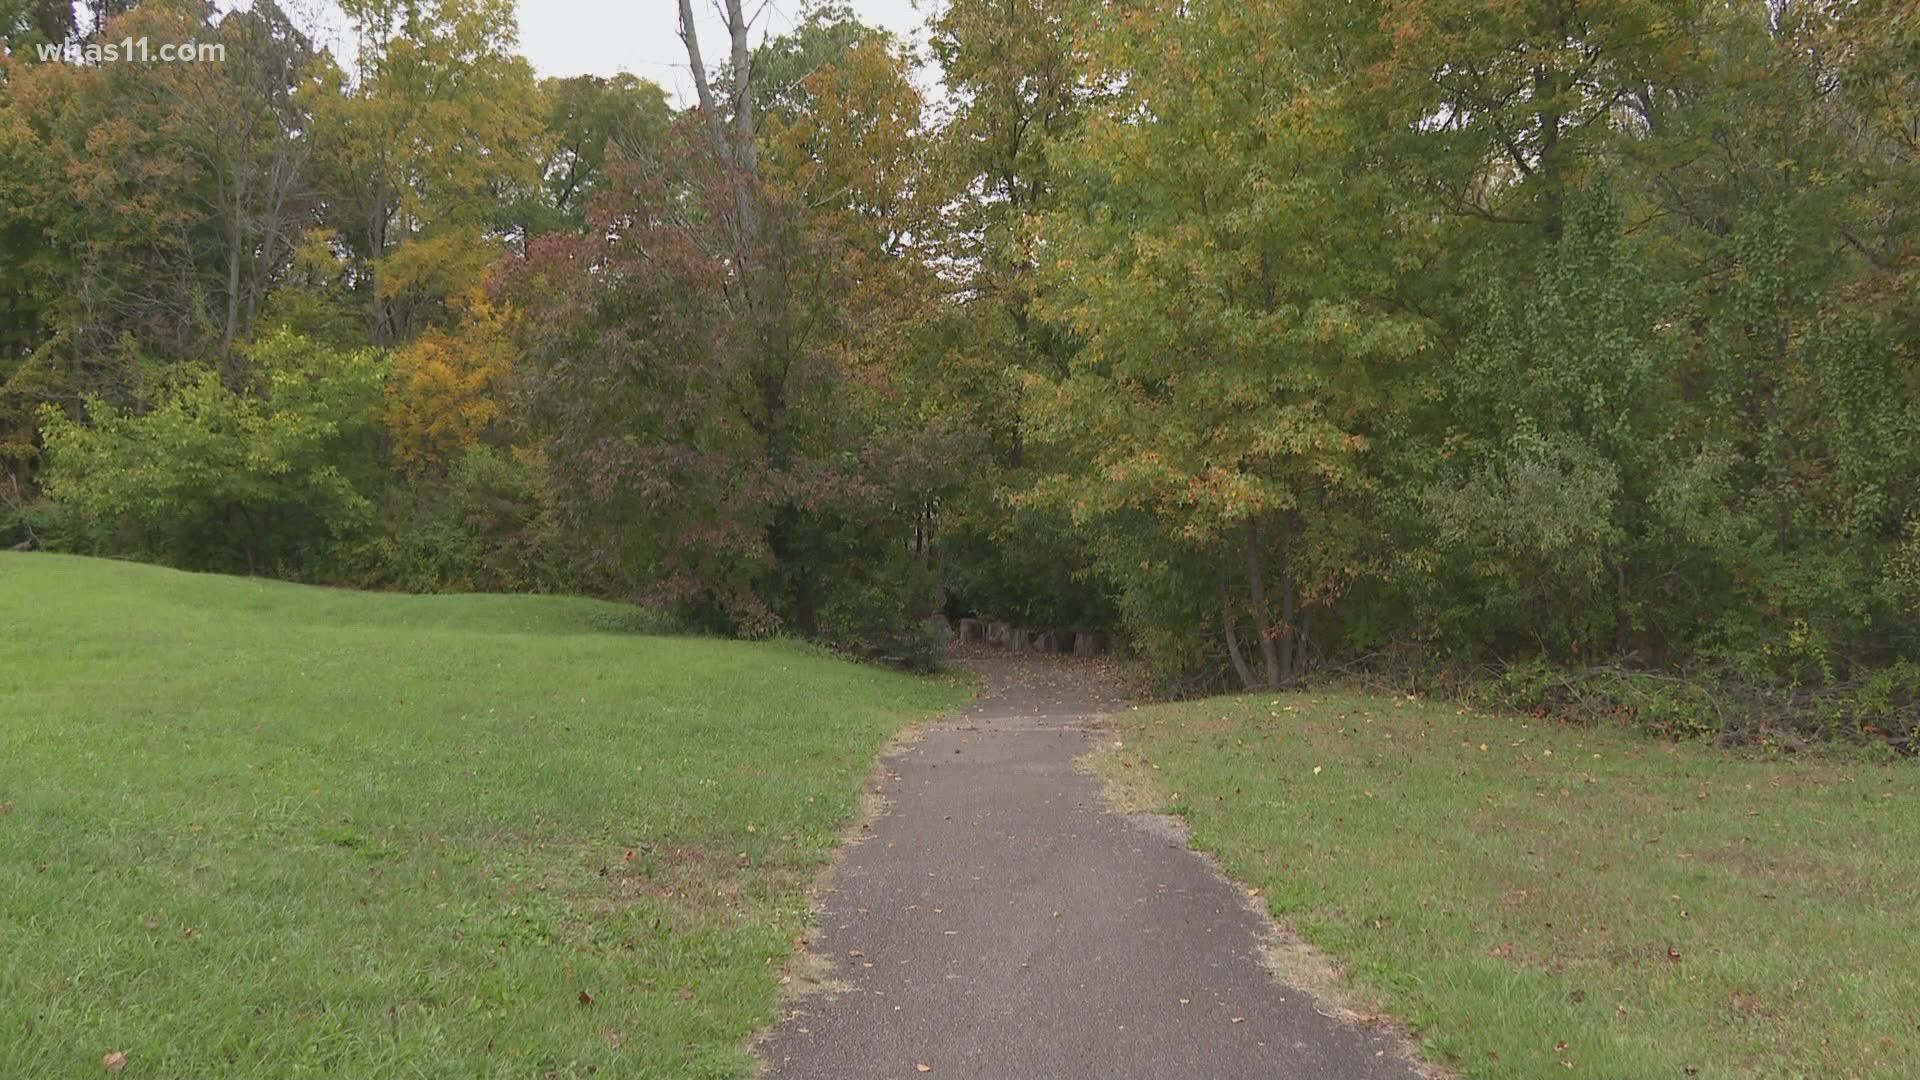 The president of the West Louisville Urban Coalition purchased a small piece of land on a golf course, but lawyers say he can't use it in the way he had hoped.